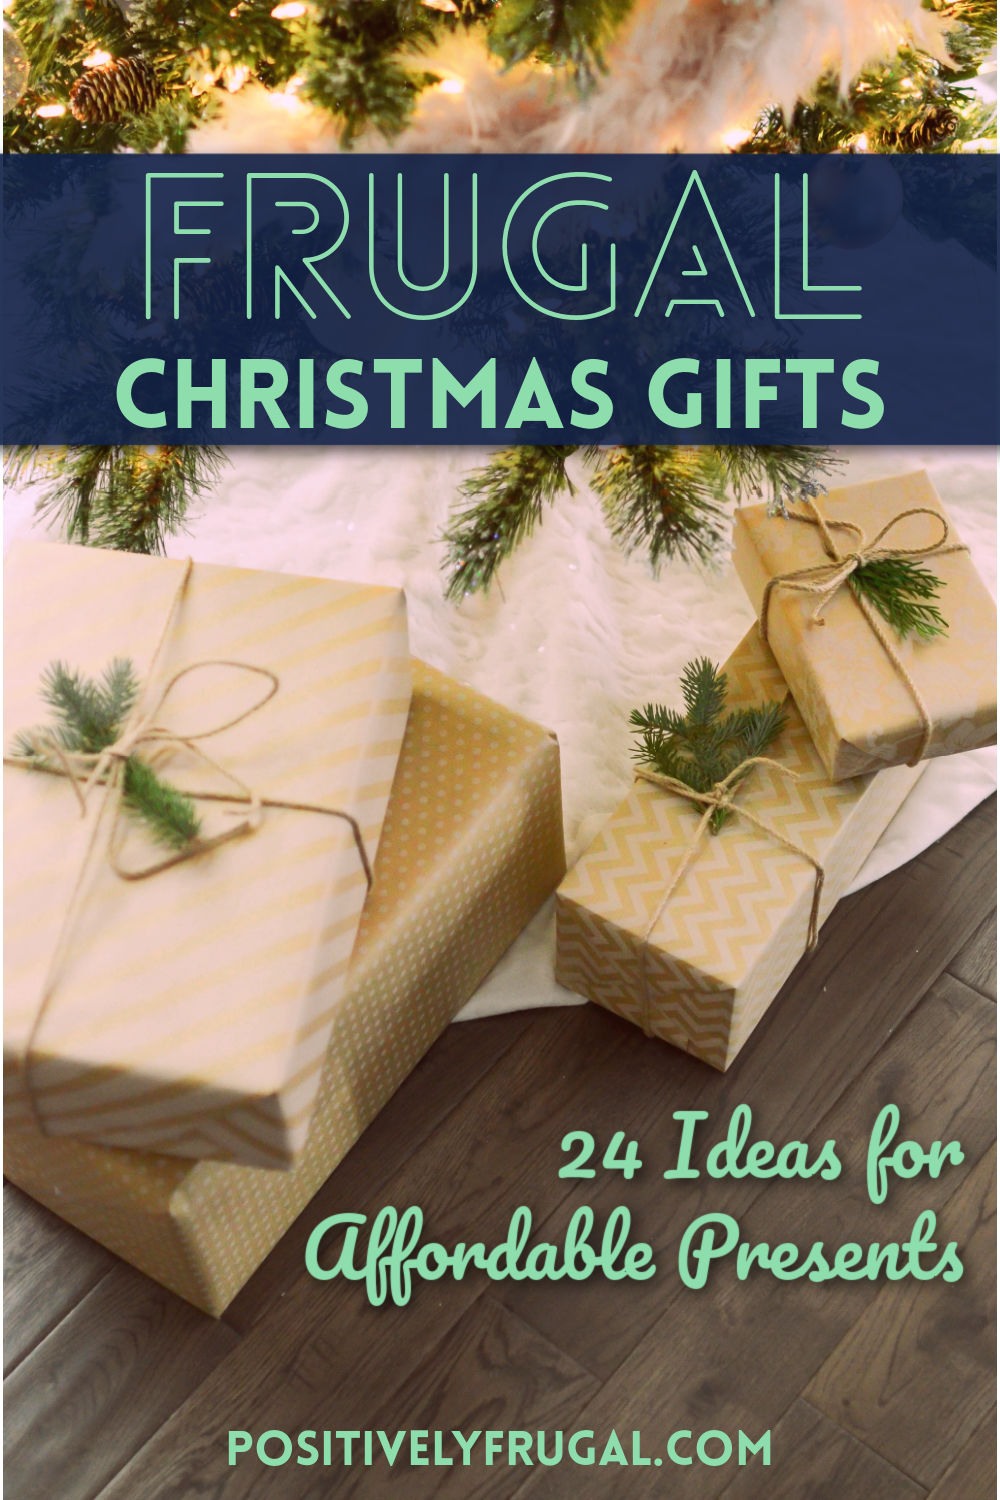 Frugal Christmas Gifts Affordable Presents by PositivelyFrugal.com